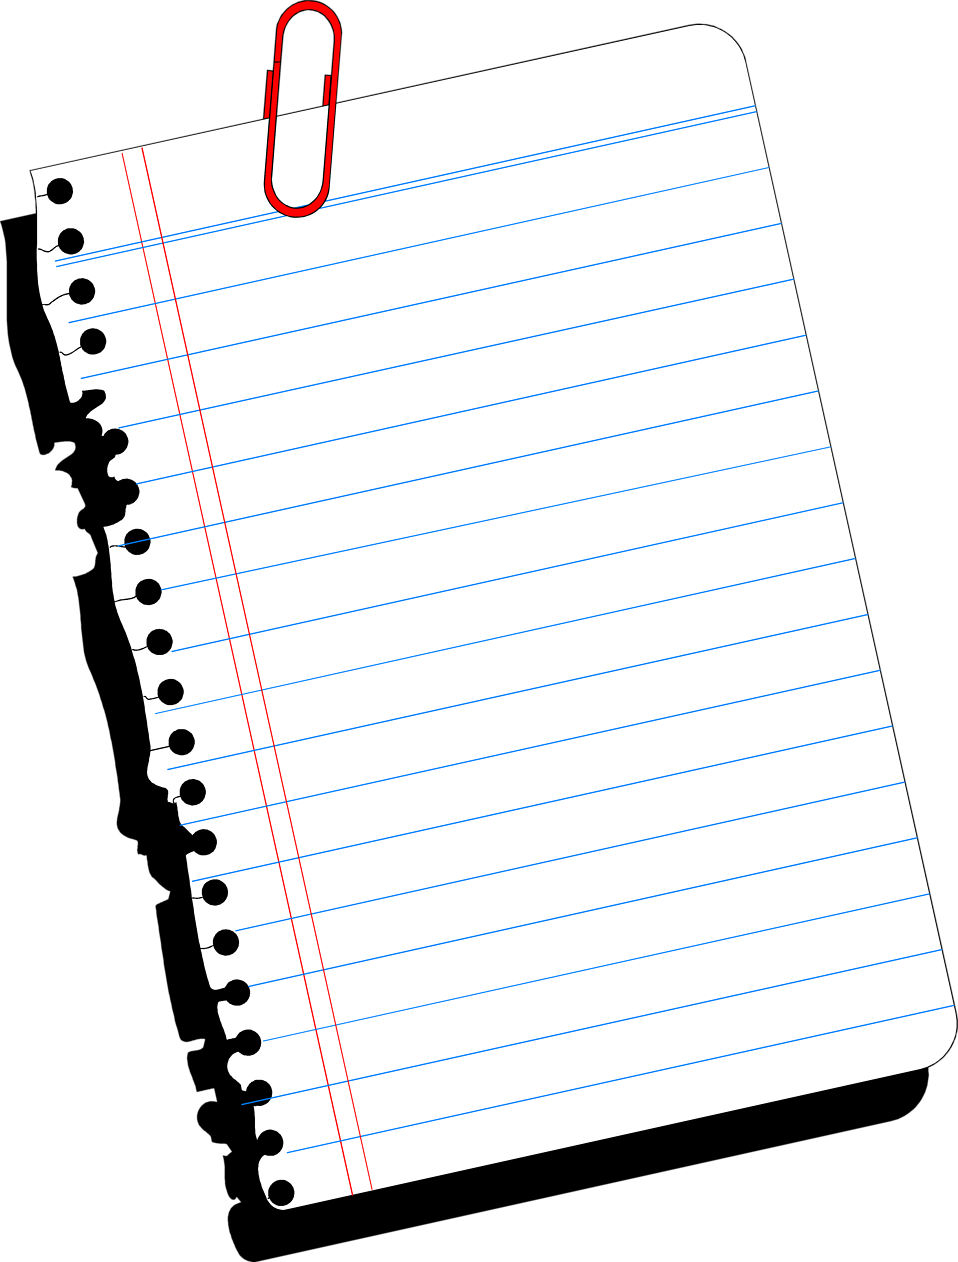 paper-free-stock-photo-illustration-of-a-blank-notebook-paper-3334